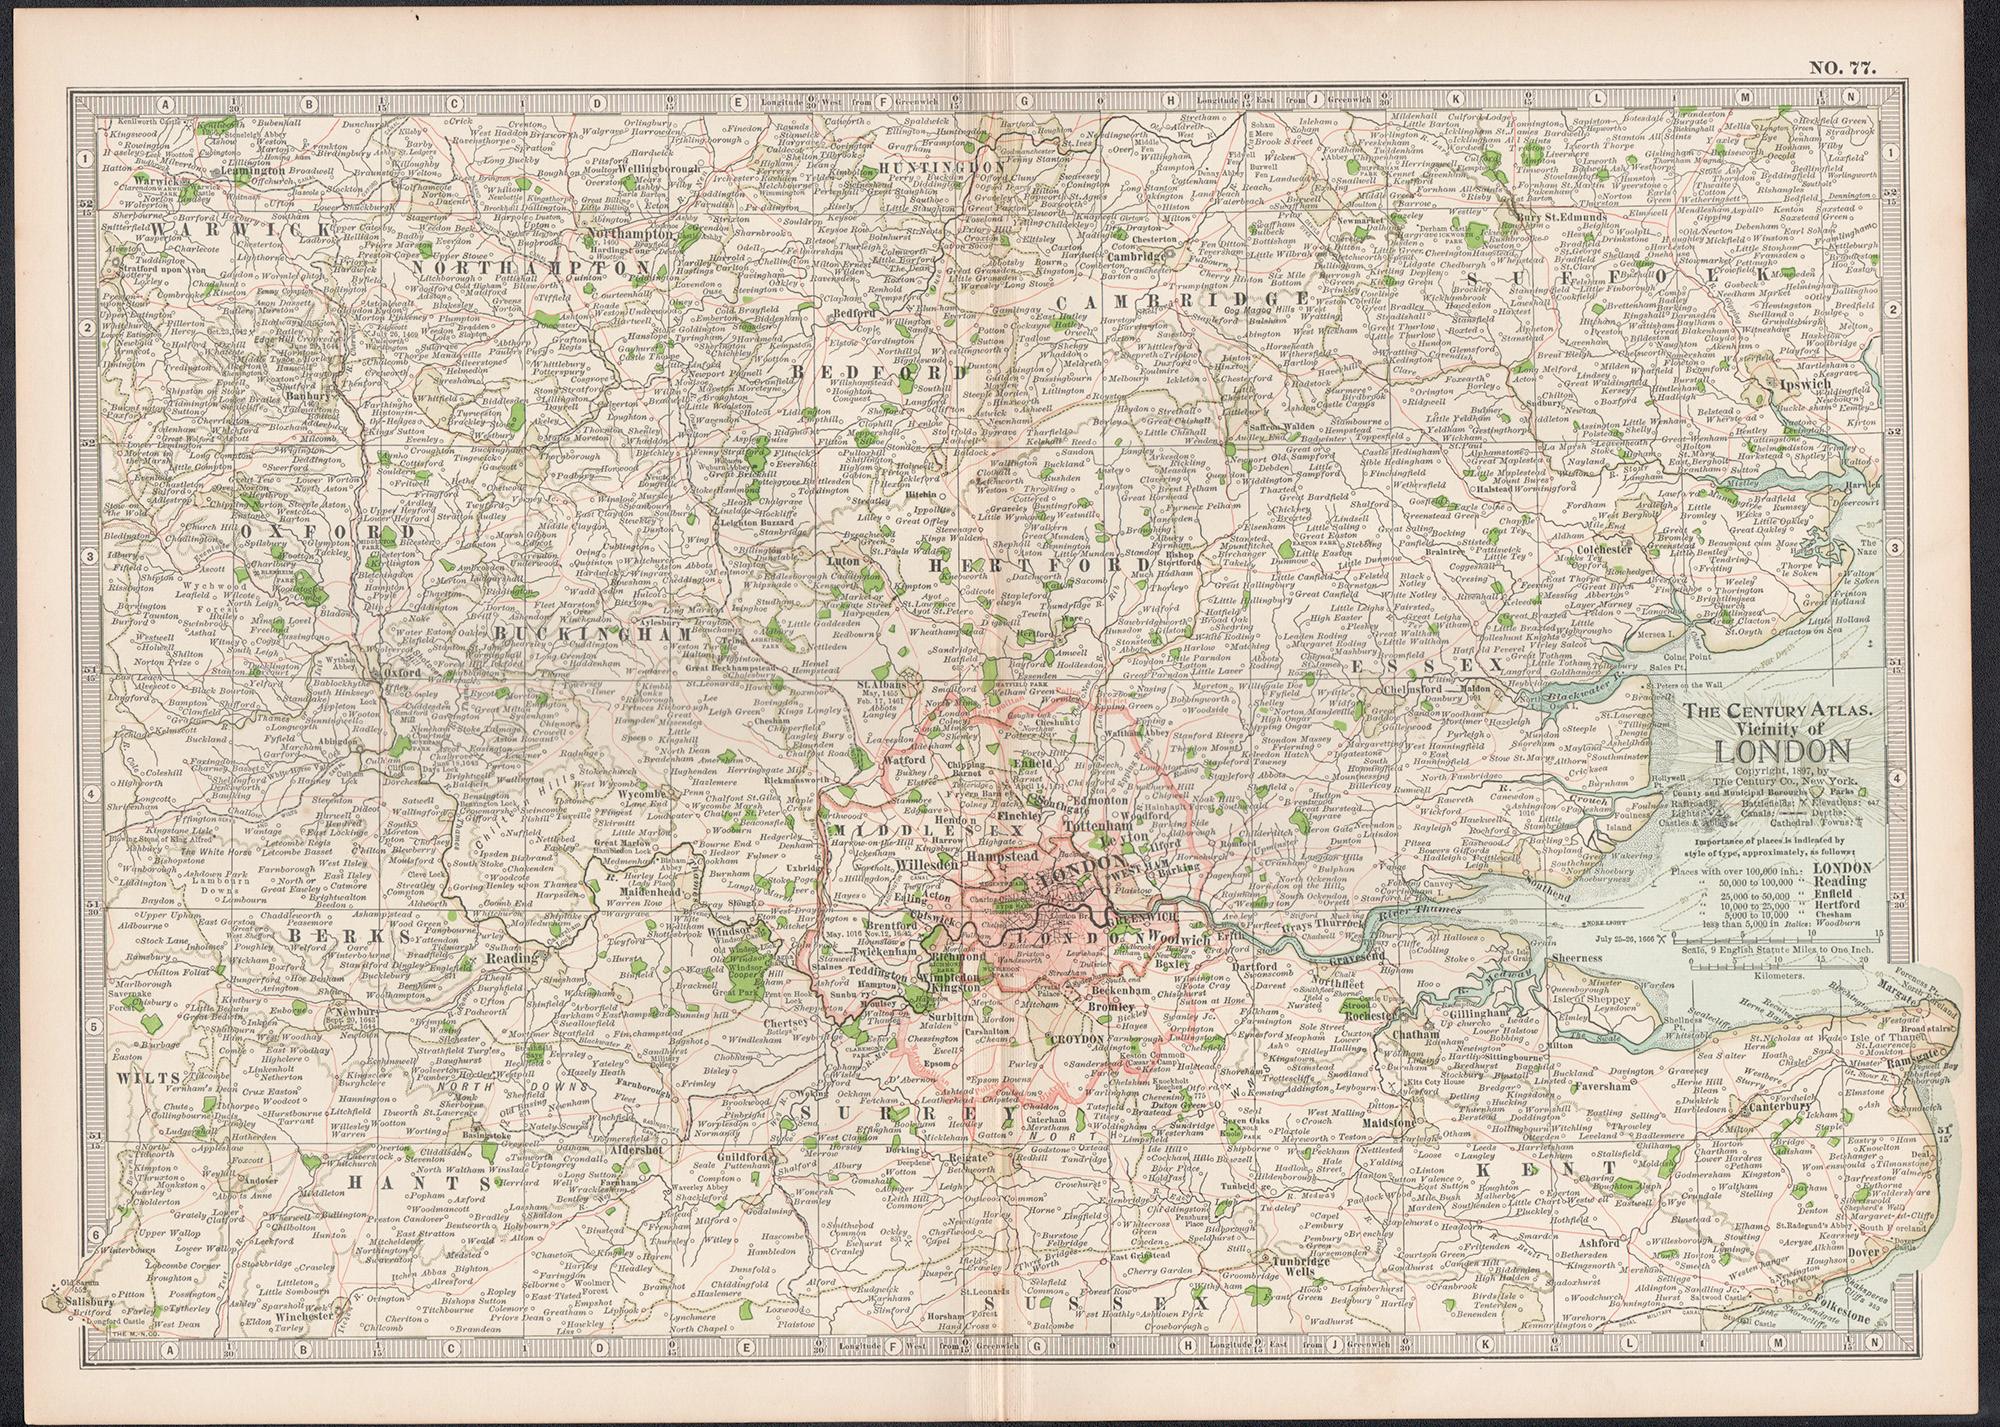 Vicinity of London, England, United Kingdom. Century Atlas antique map - Print by Unknown